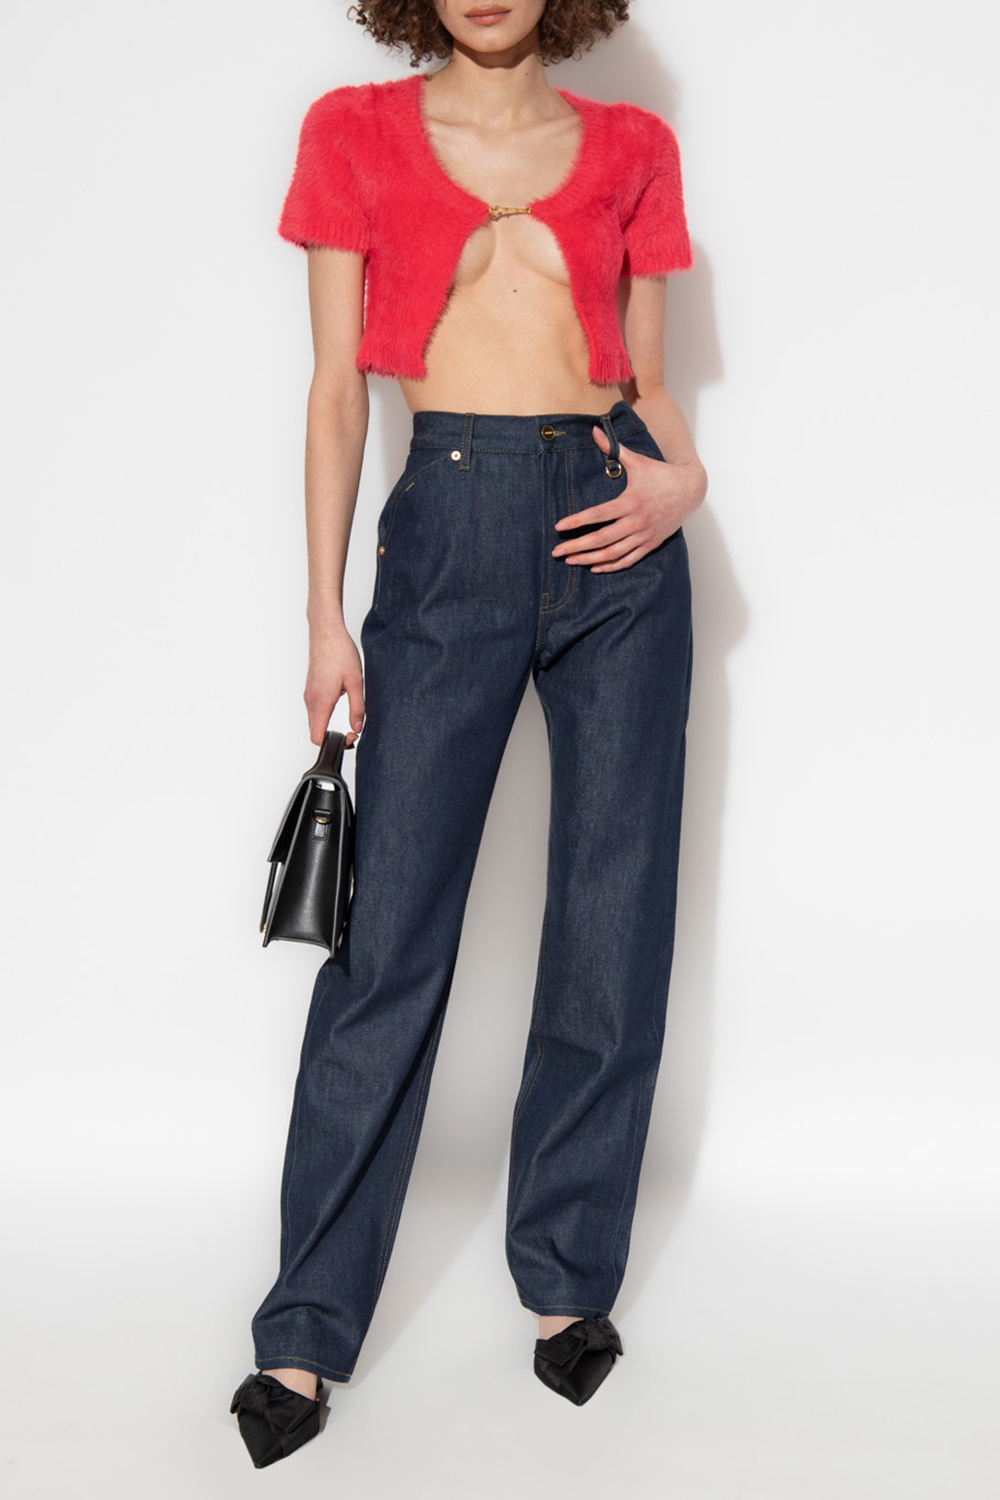 Jacquemus ‘Neve’ cropped top with logo